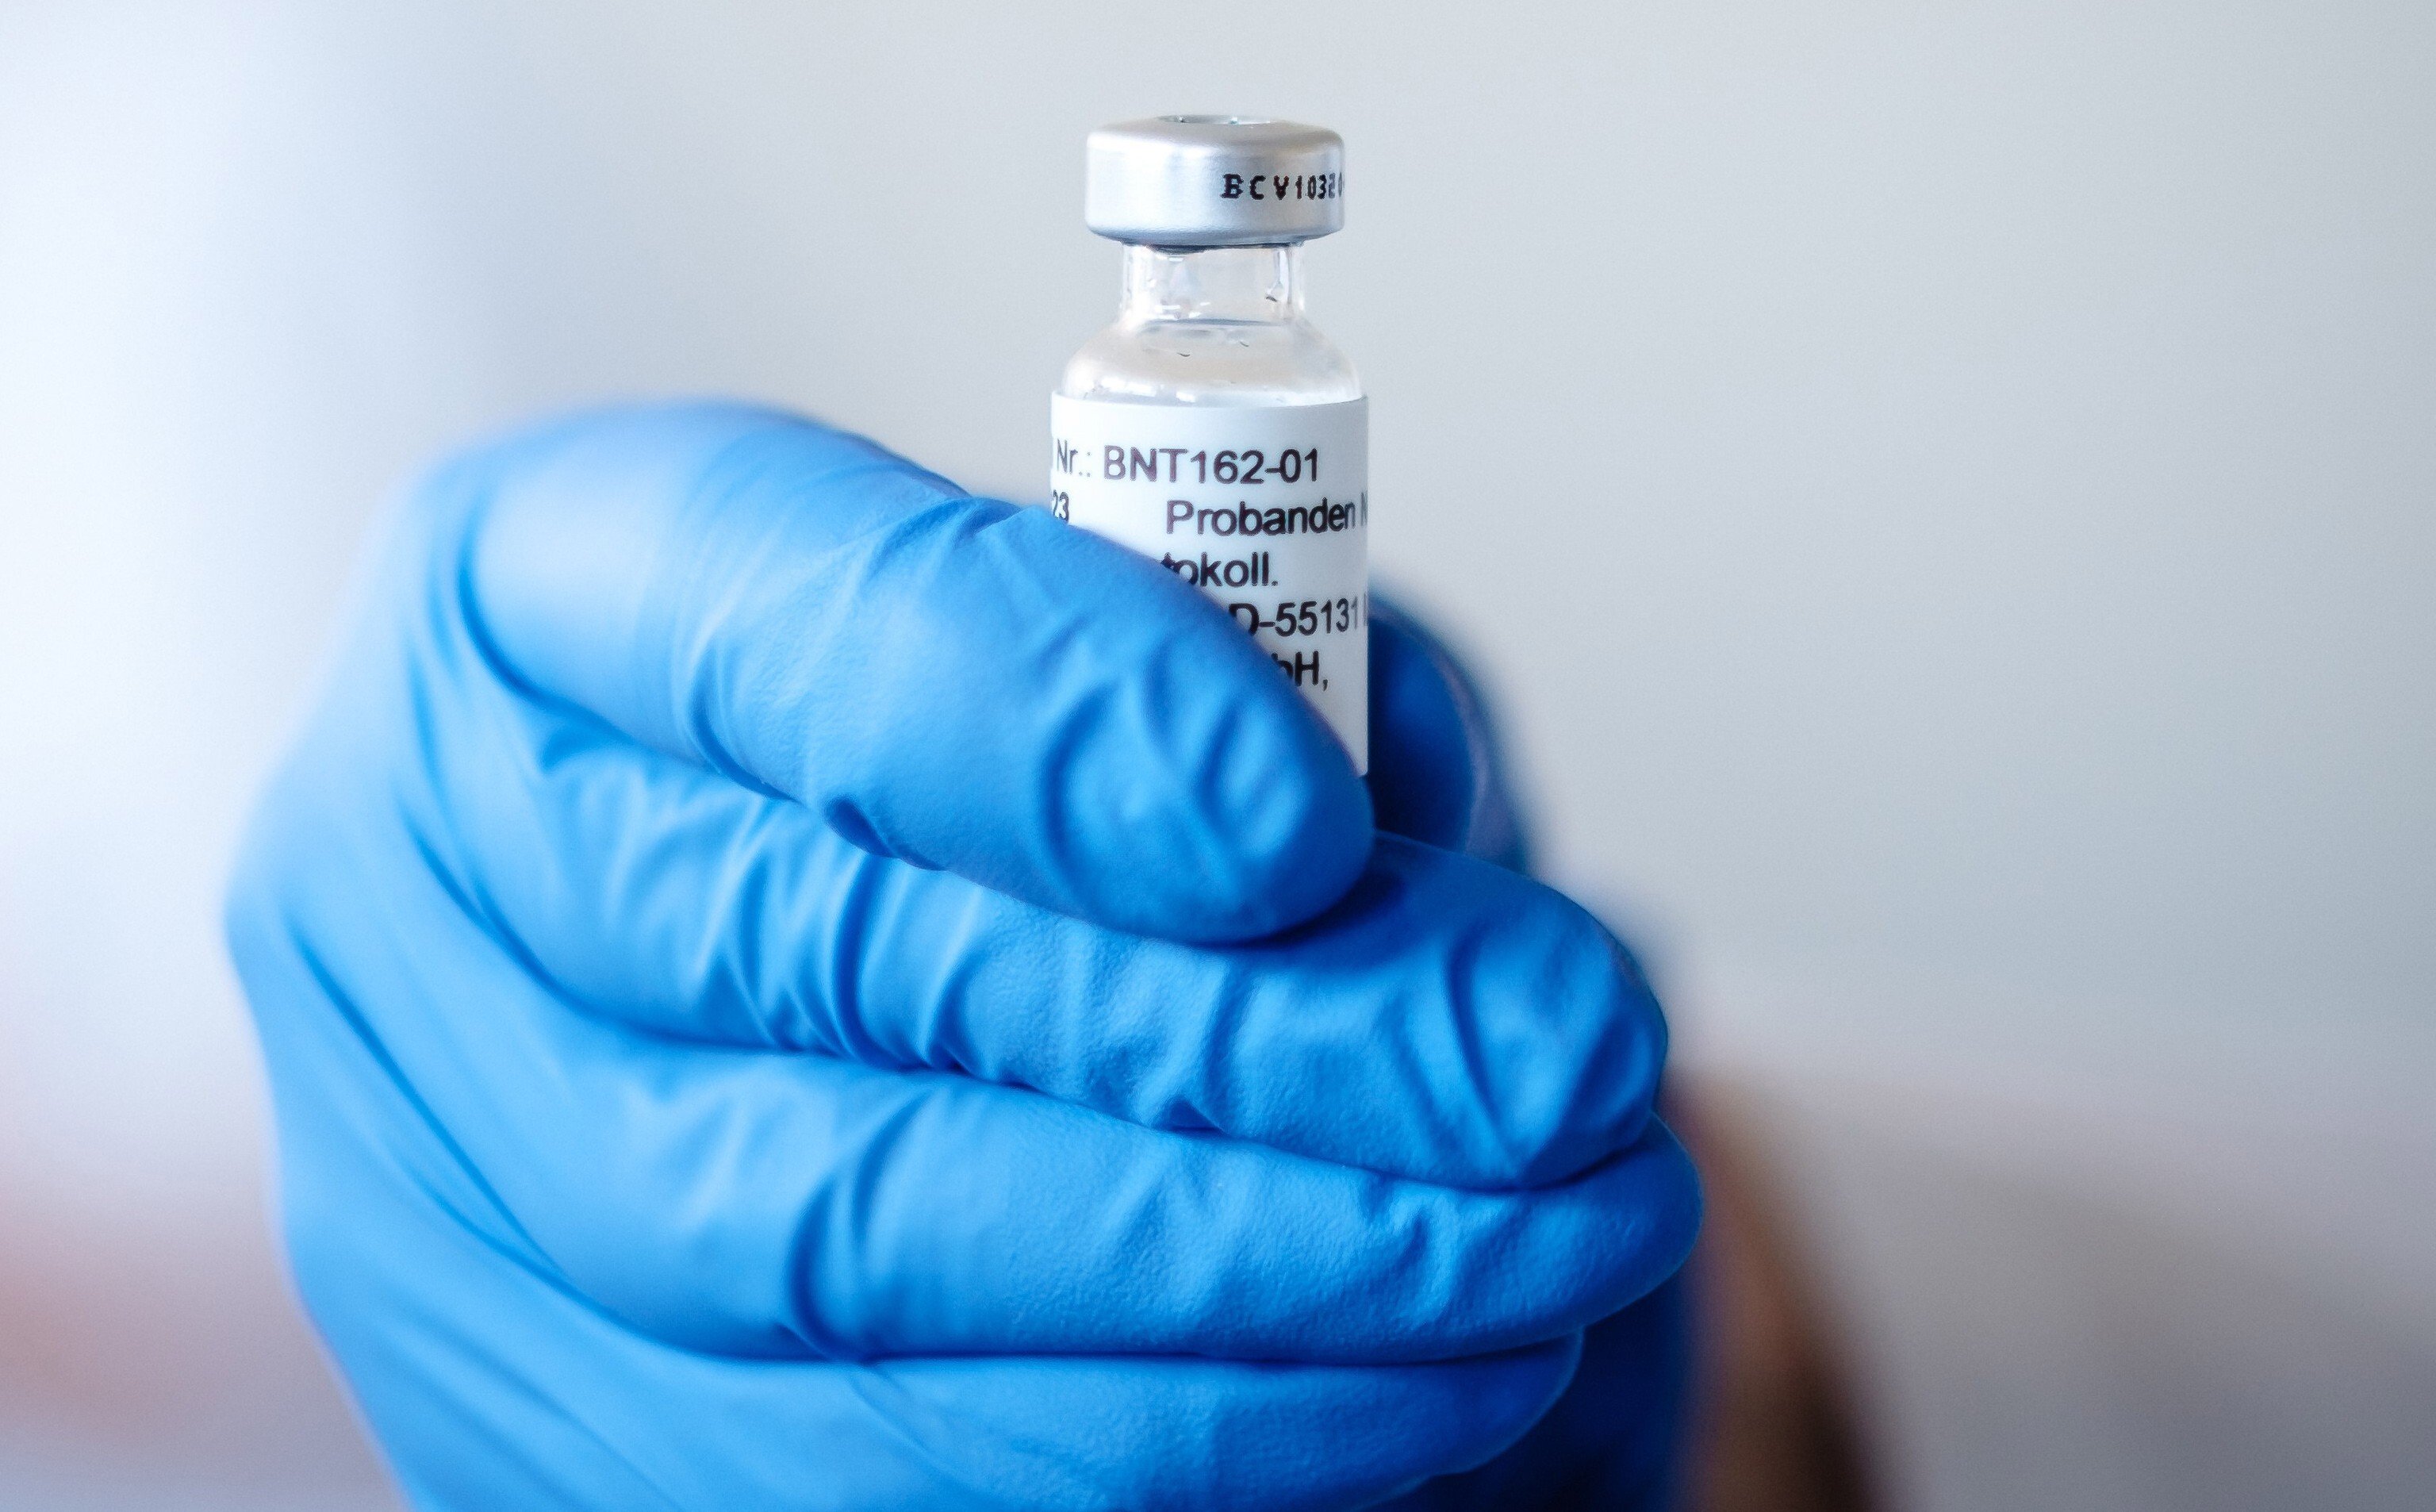 An ampoule for a Covid-19 vaccine candidate from Germany’s BioNtech. Photo: EPA-EFE